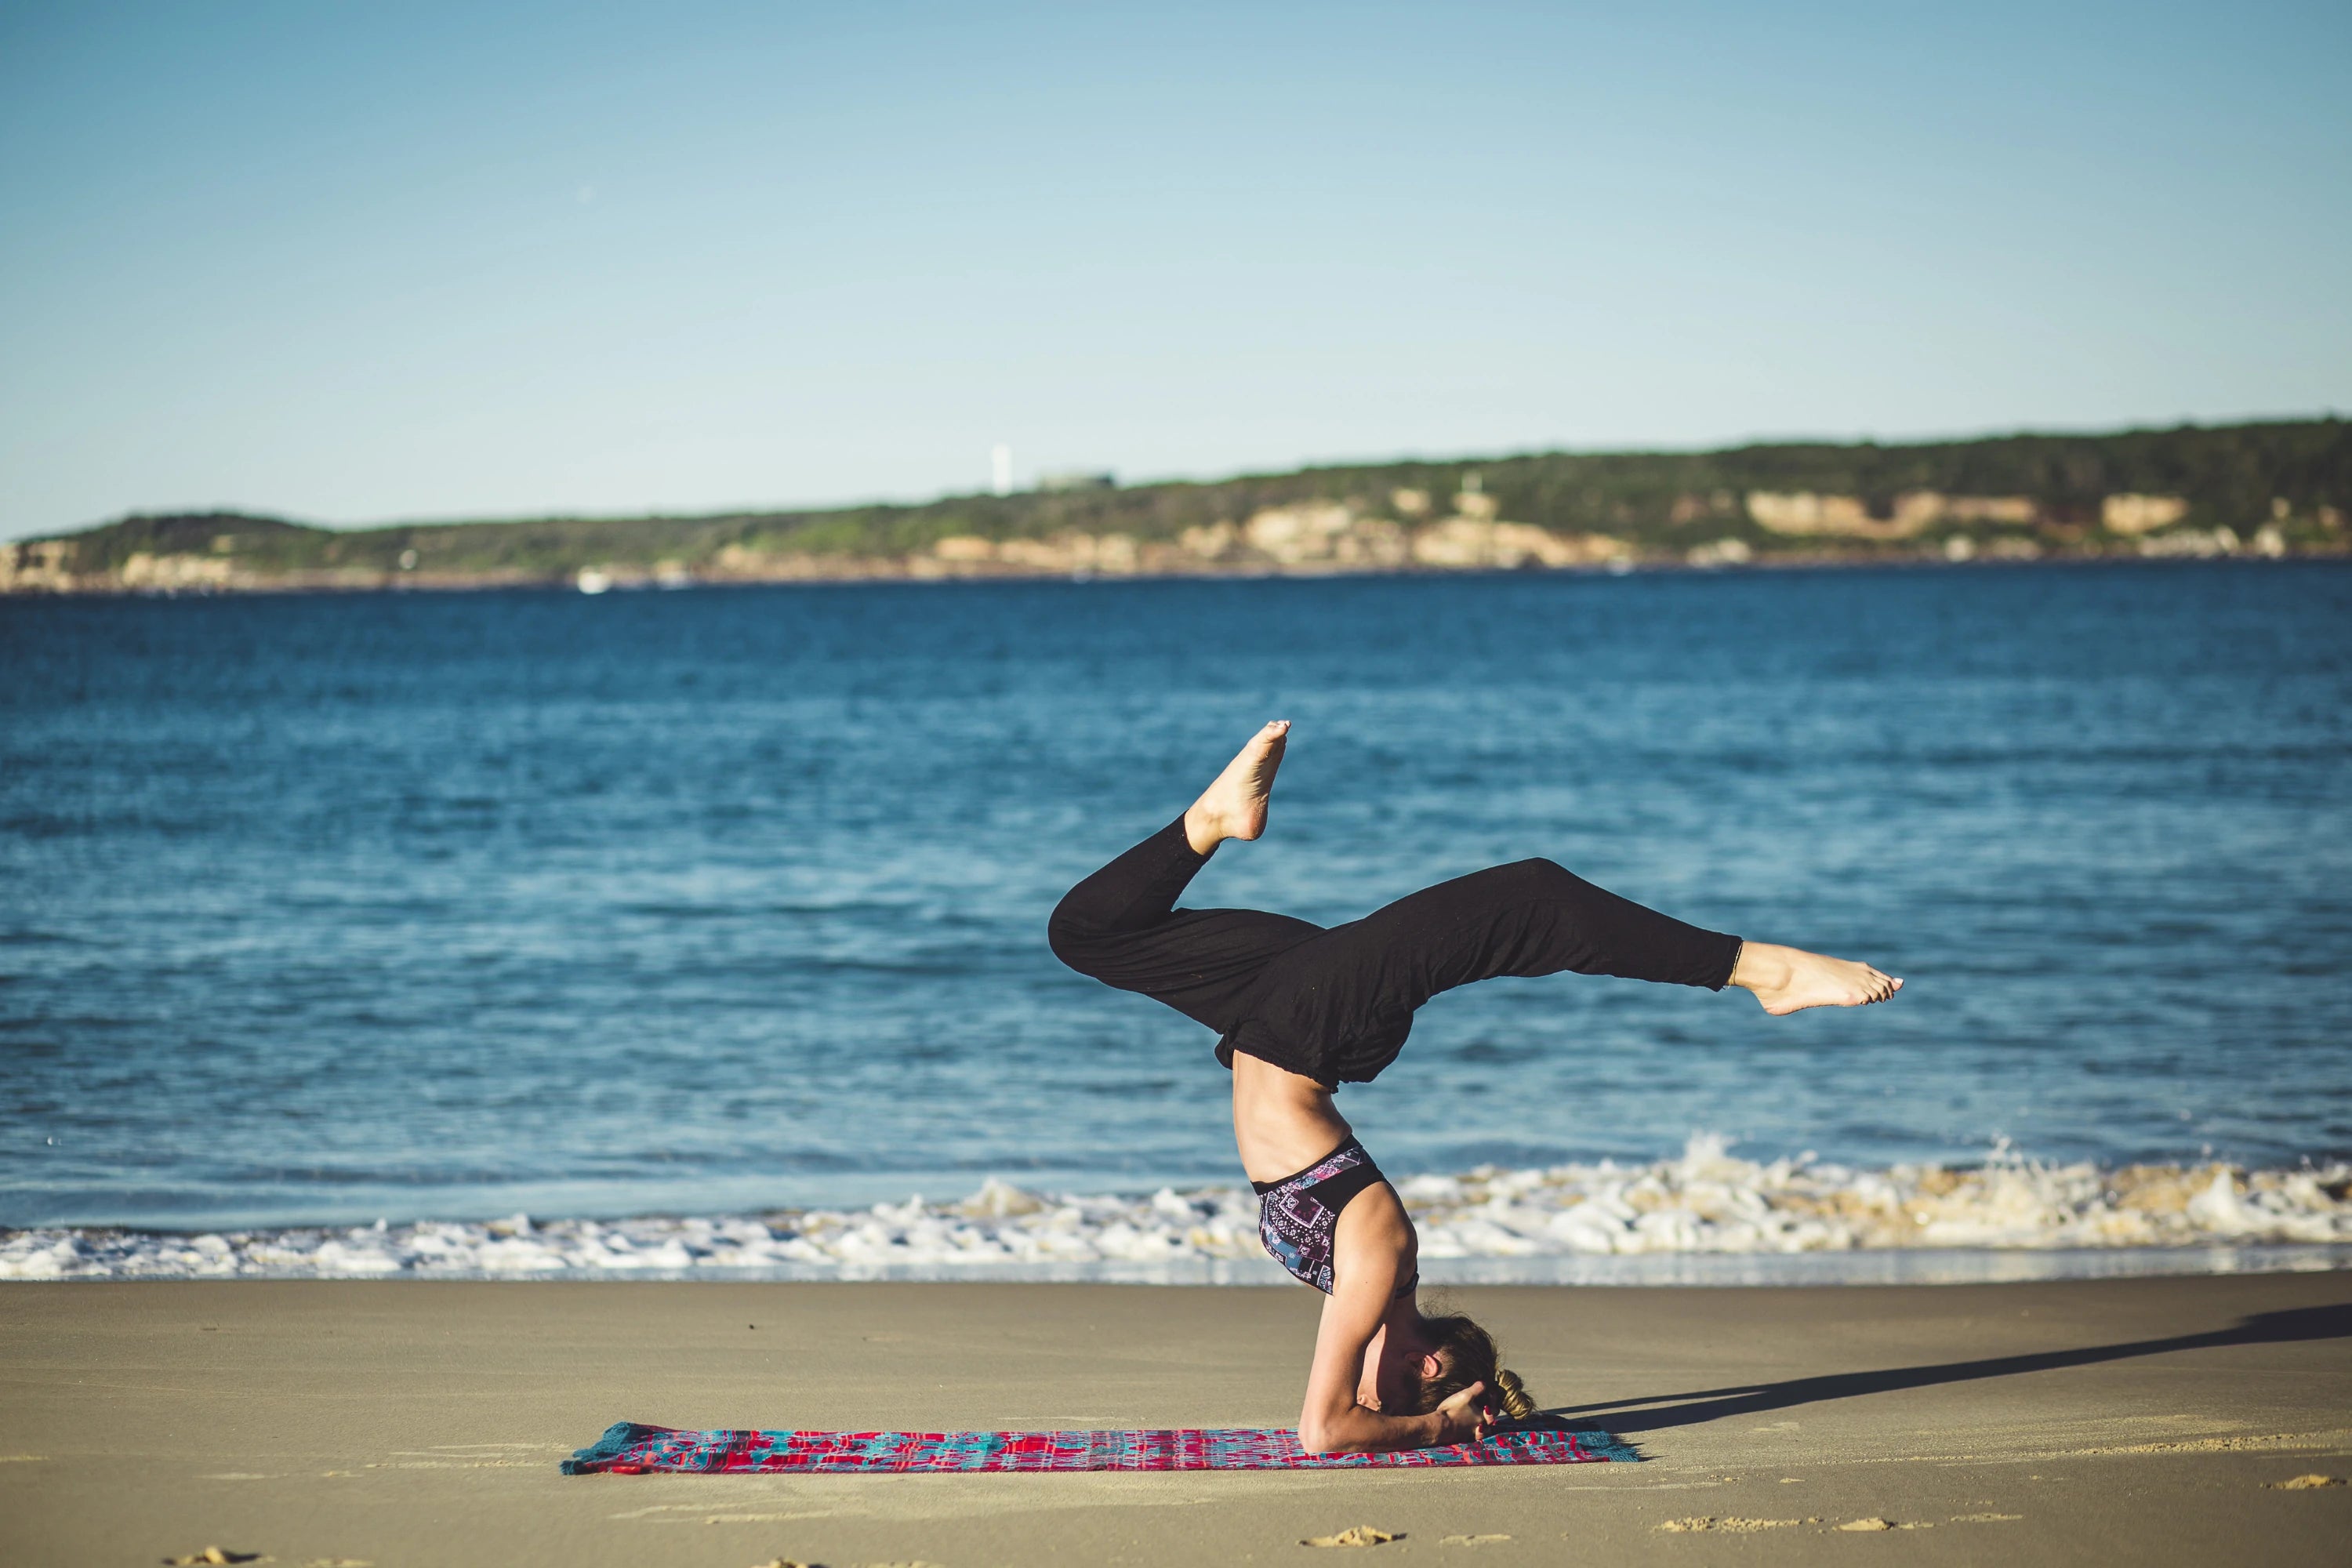 8 Habits for Rapid Progress in Yoga Practice – How Many Do You Have?